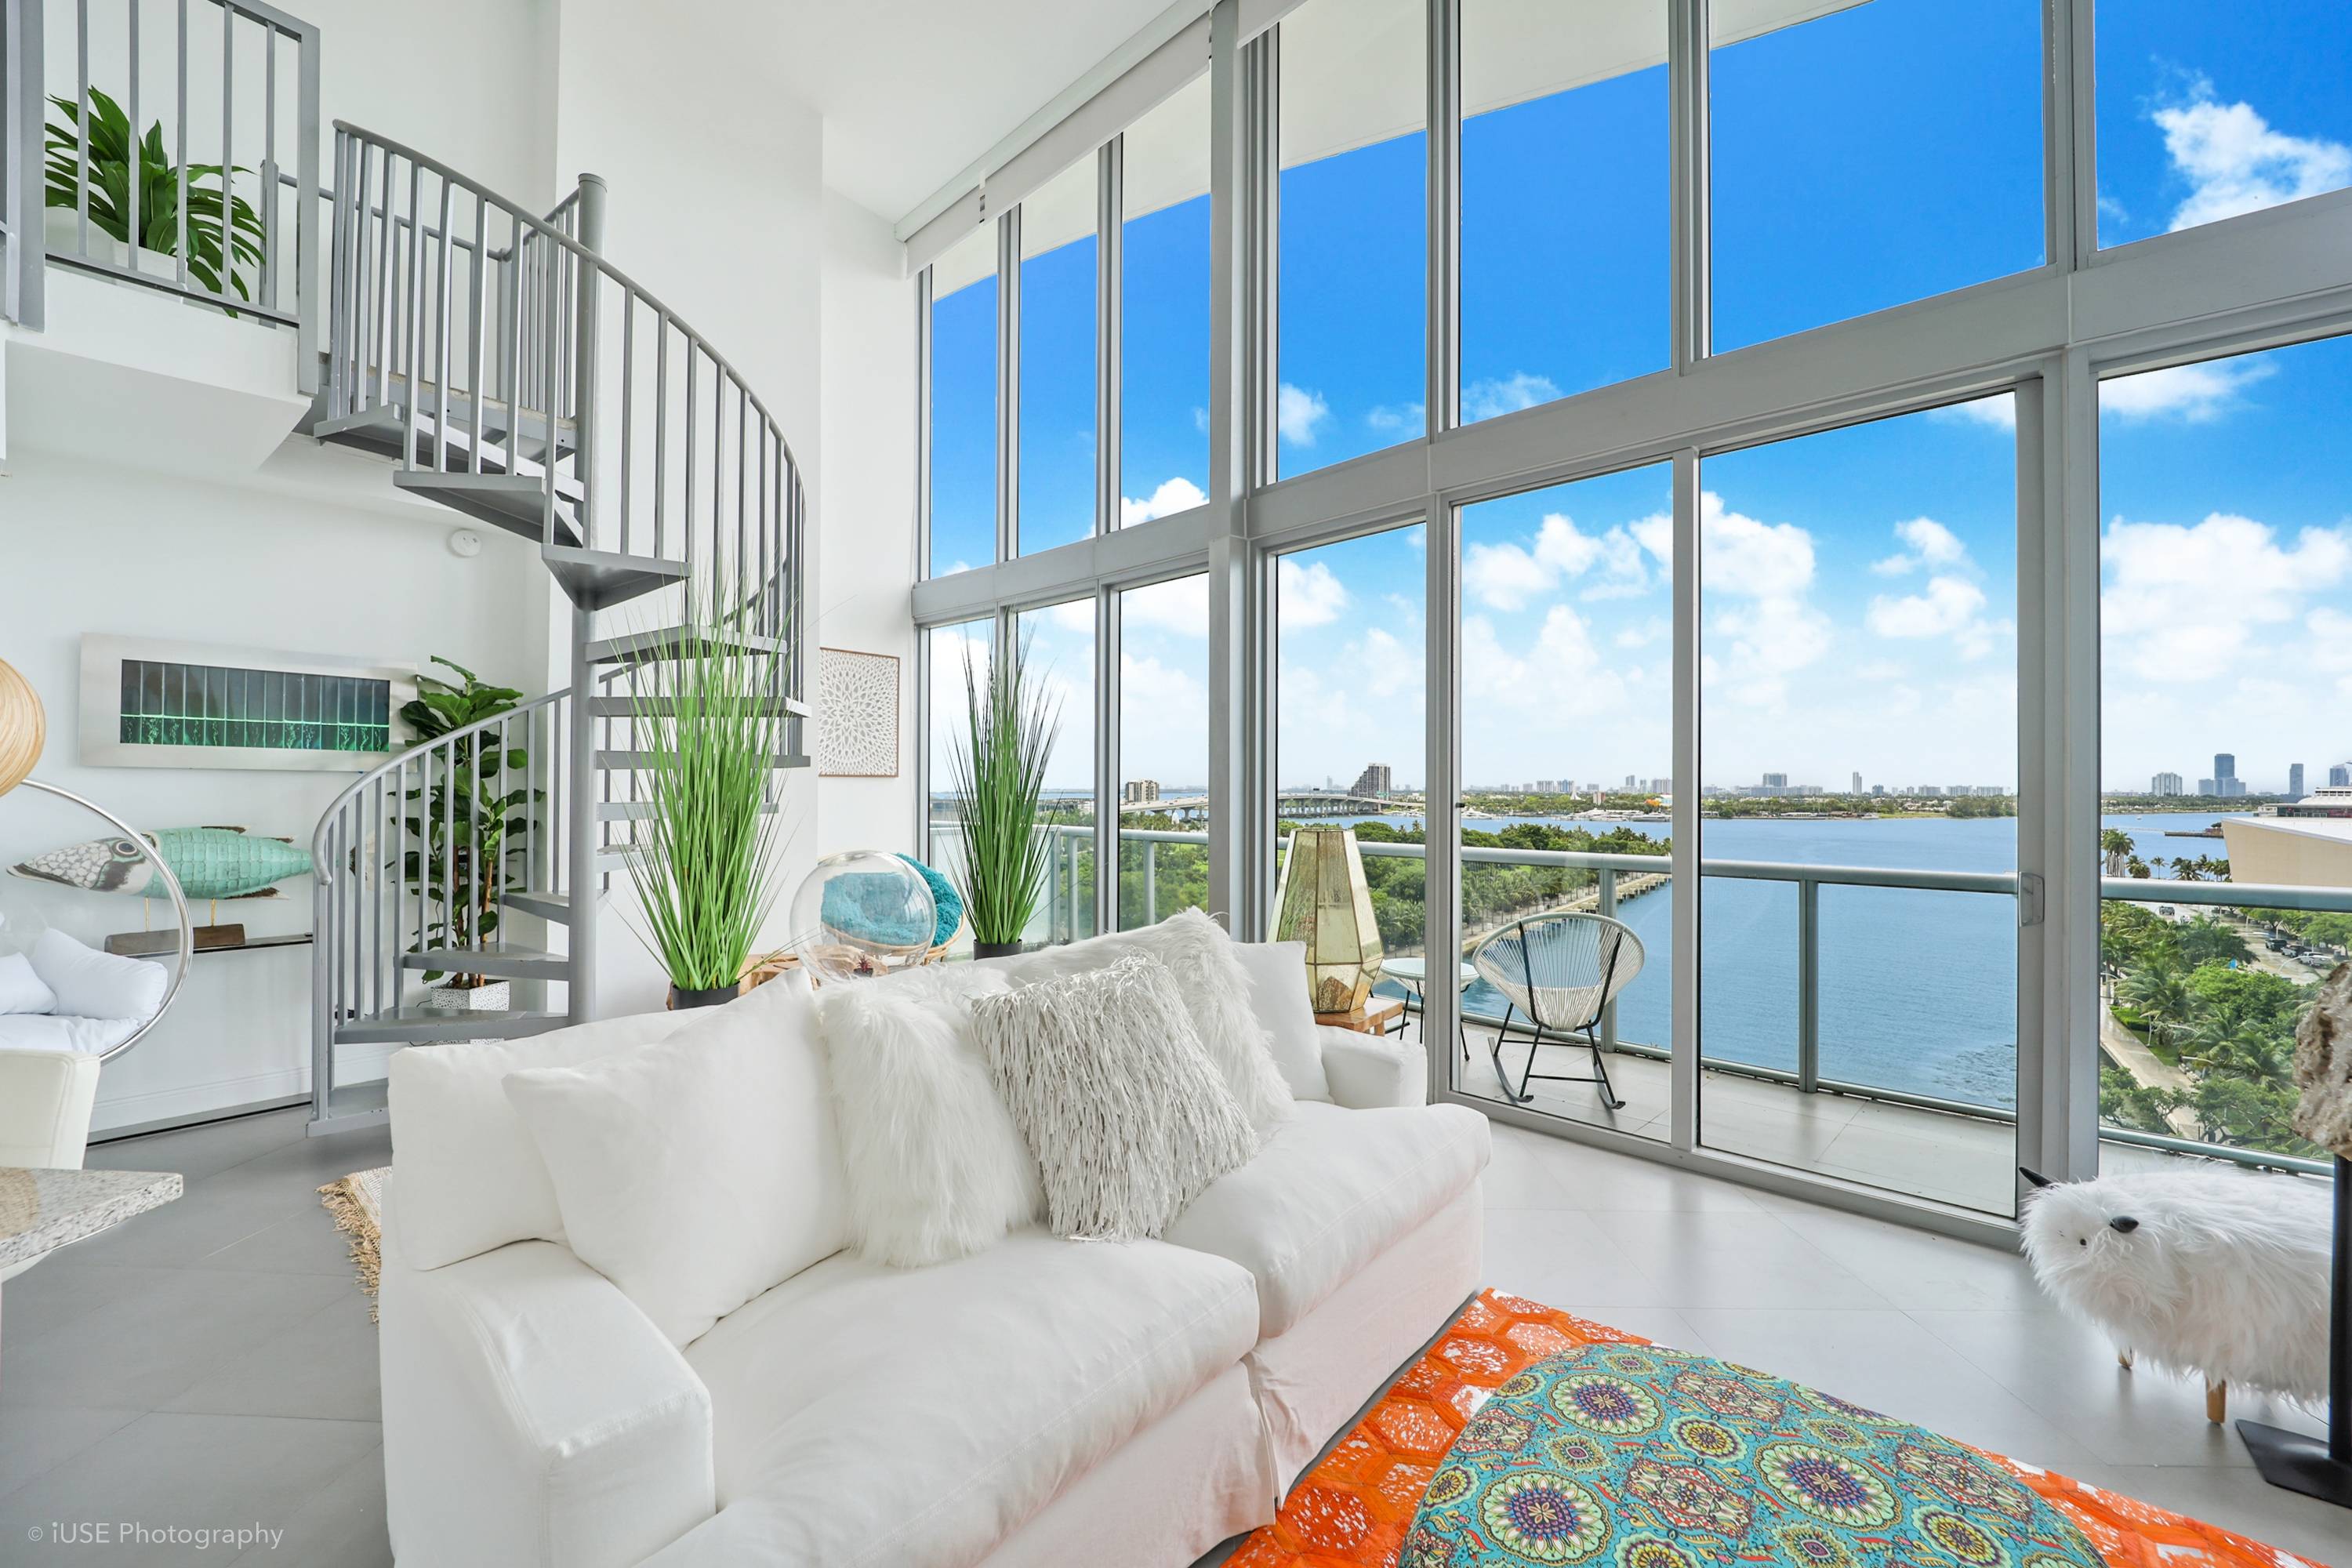 Downtown Miami Loft for Sale I Water view I 1Bed, 1.5Baths I 1,024 Sq Ft I $705K |